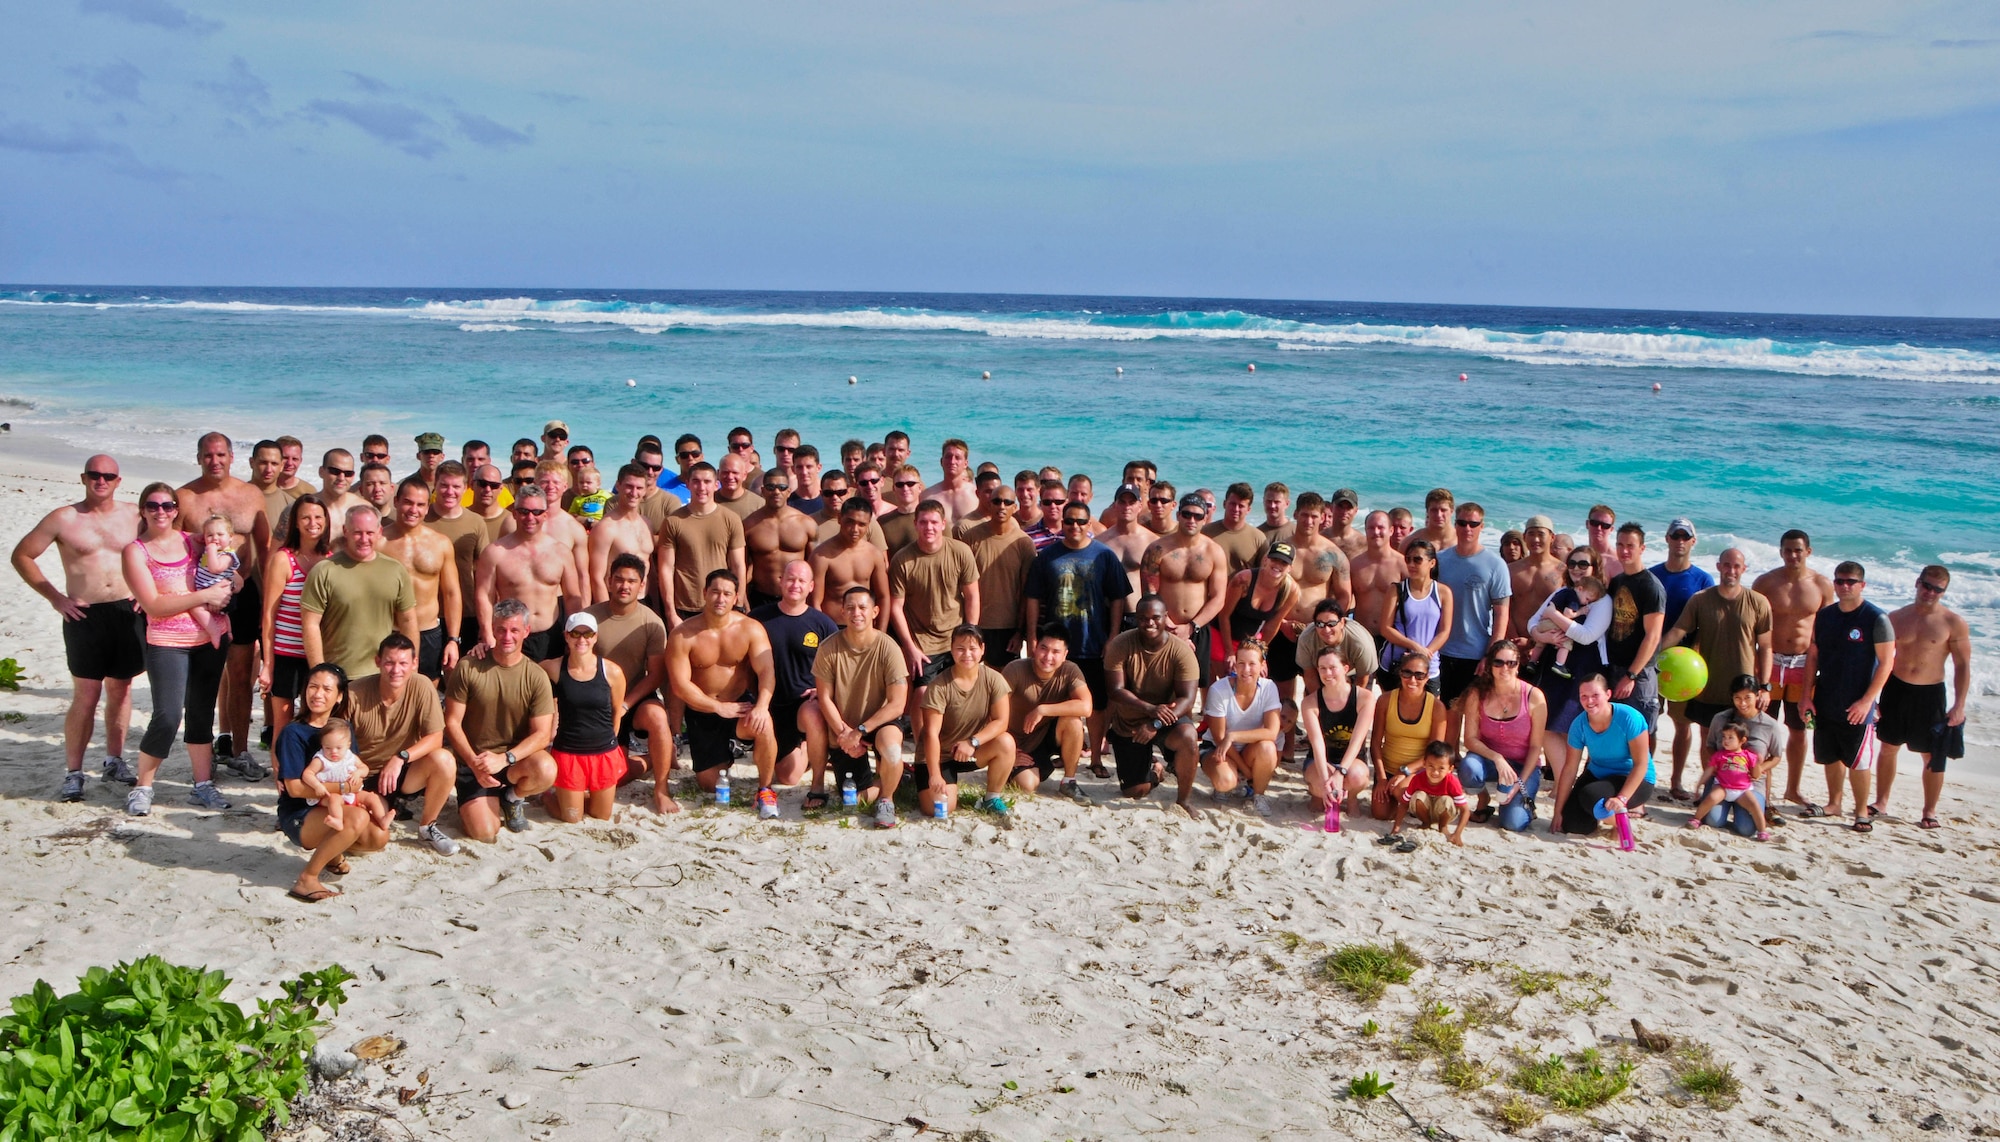 Members of U.S. Navy Explosive Ordnance Disposal Mobile Unit 5 gather on Tarague Beach with their families for a group photo at Andersen Air Force Base, Guam, Feb. 15, 2013. The EODMU5 members and their families took on the challenge of Sanders Slope, from Tarague Beach to the top of the hill and back, as part of their family and morale day. (U.S. Air Force photo by Airman 1st Class Marianique Santos/Released)